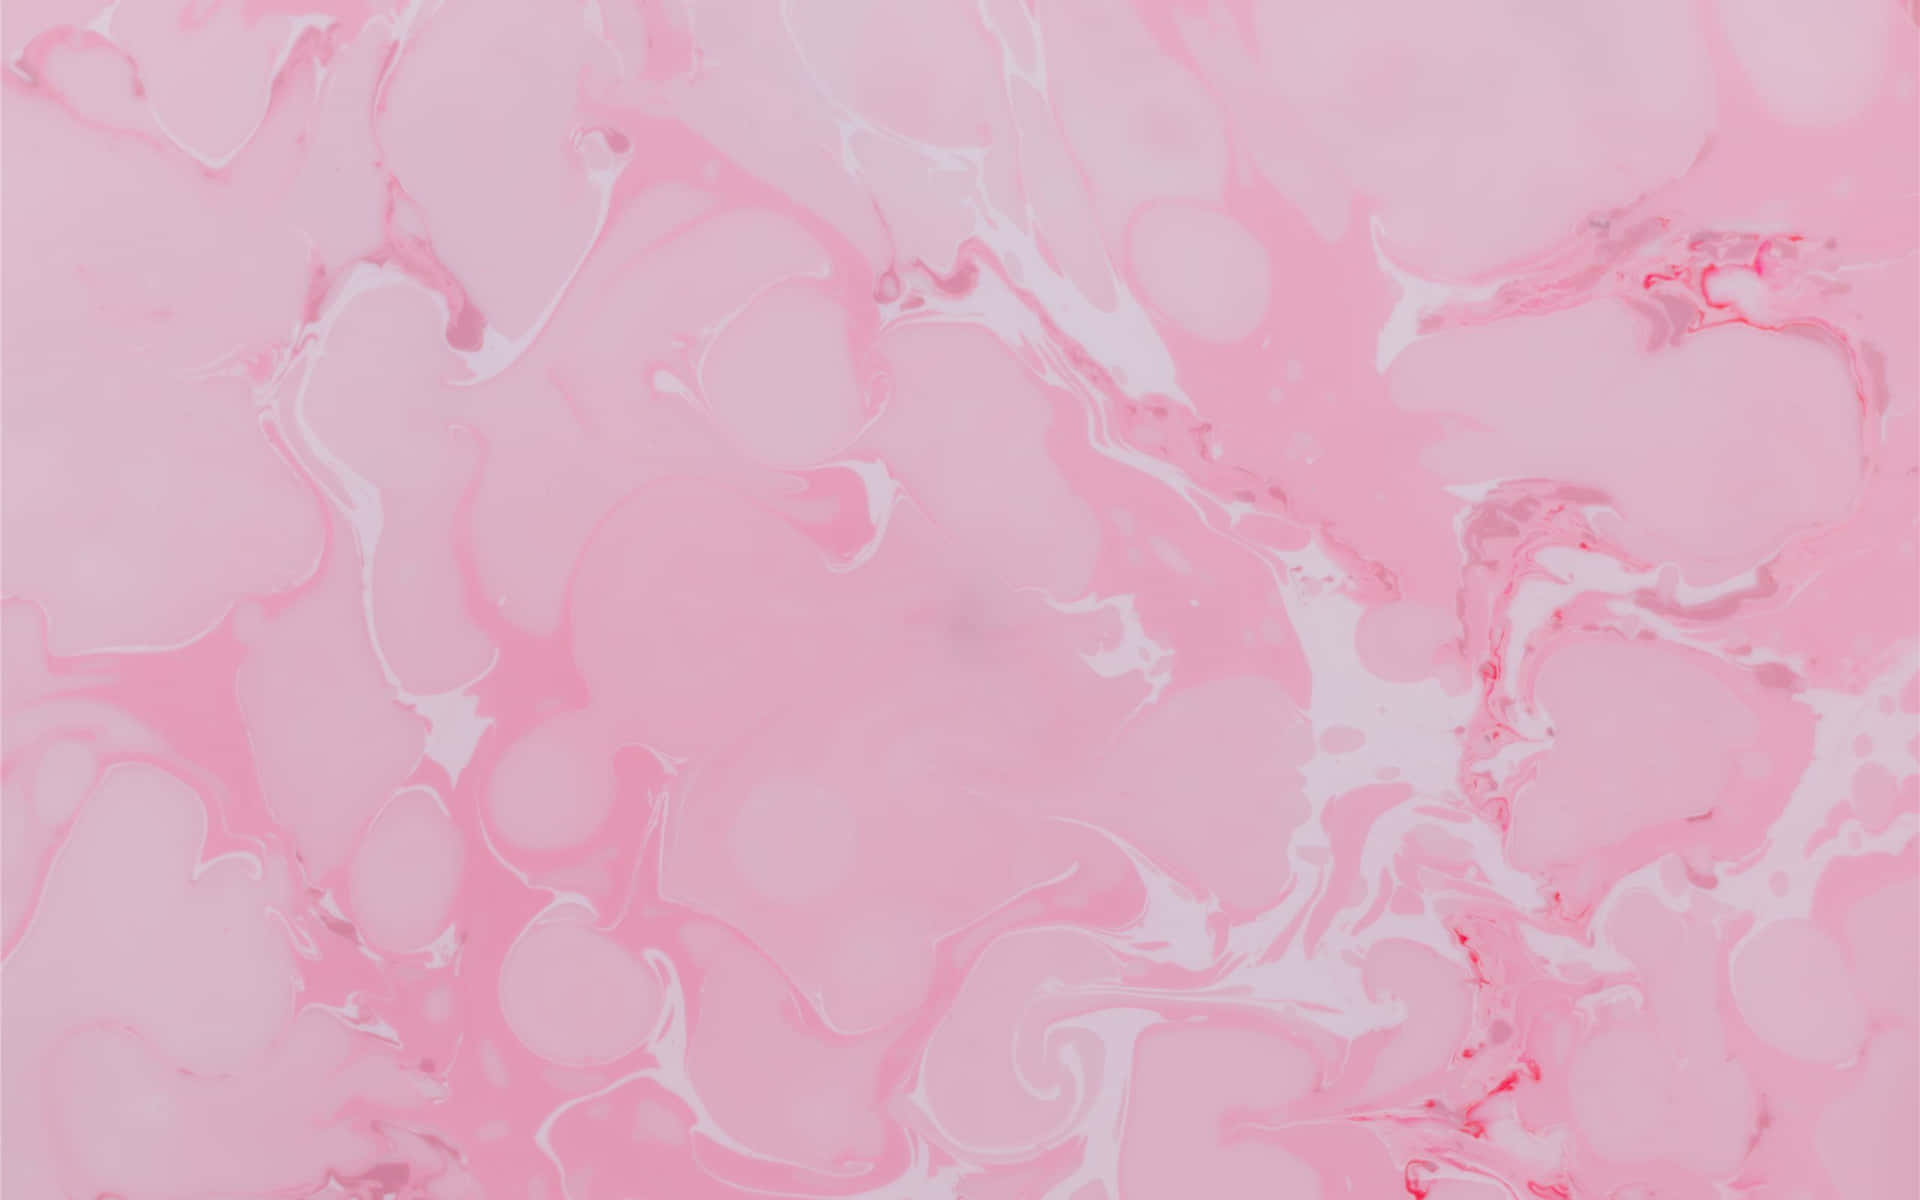 A Pink Marble Background With White Swirls